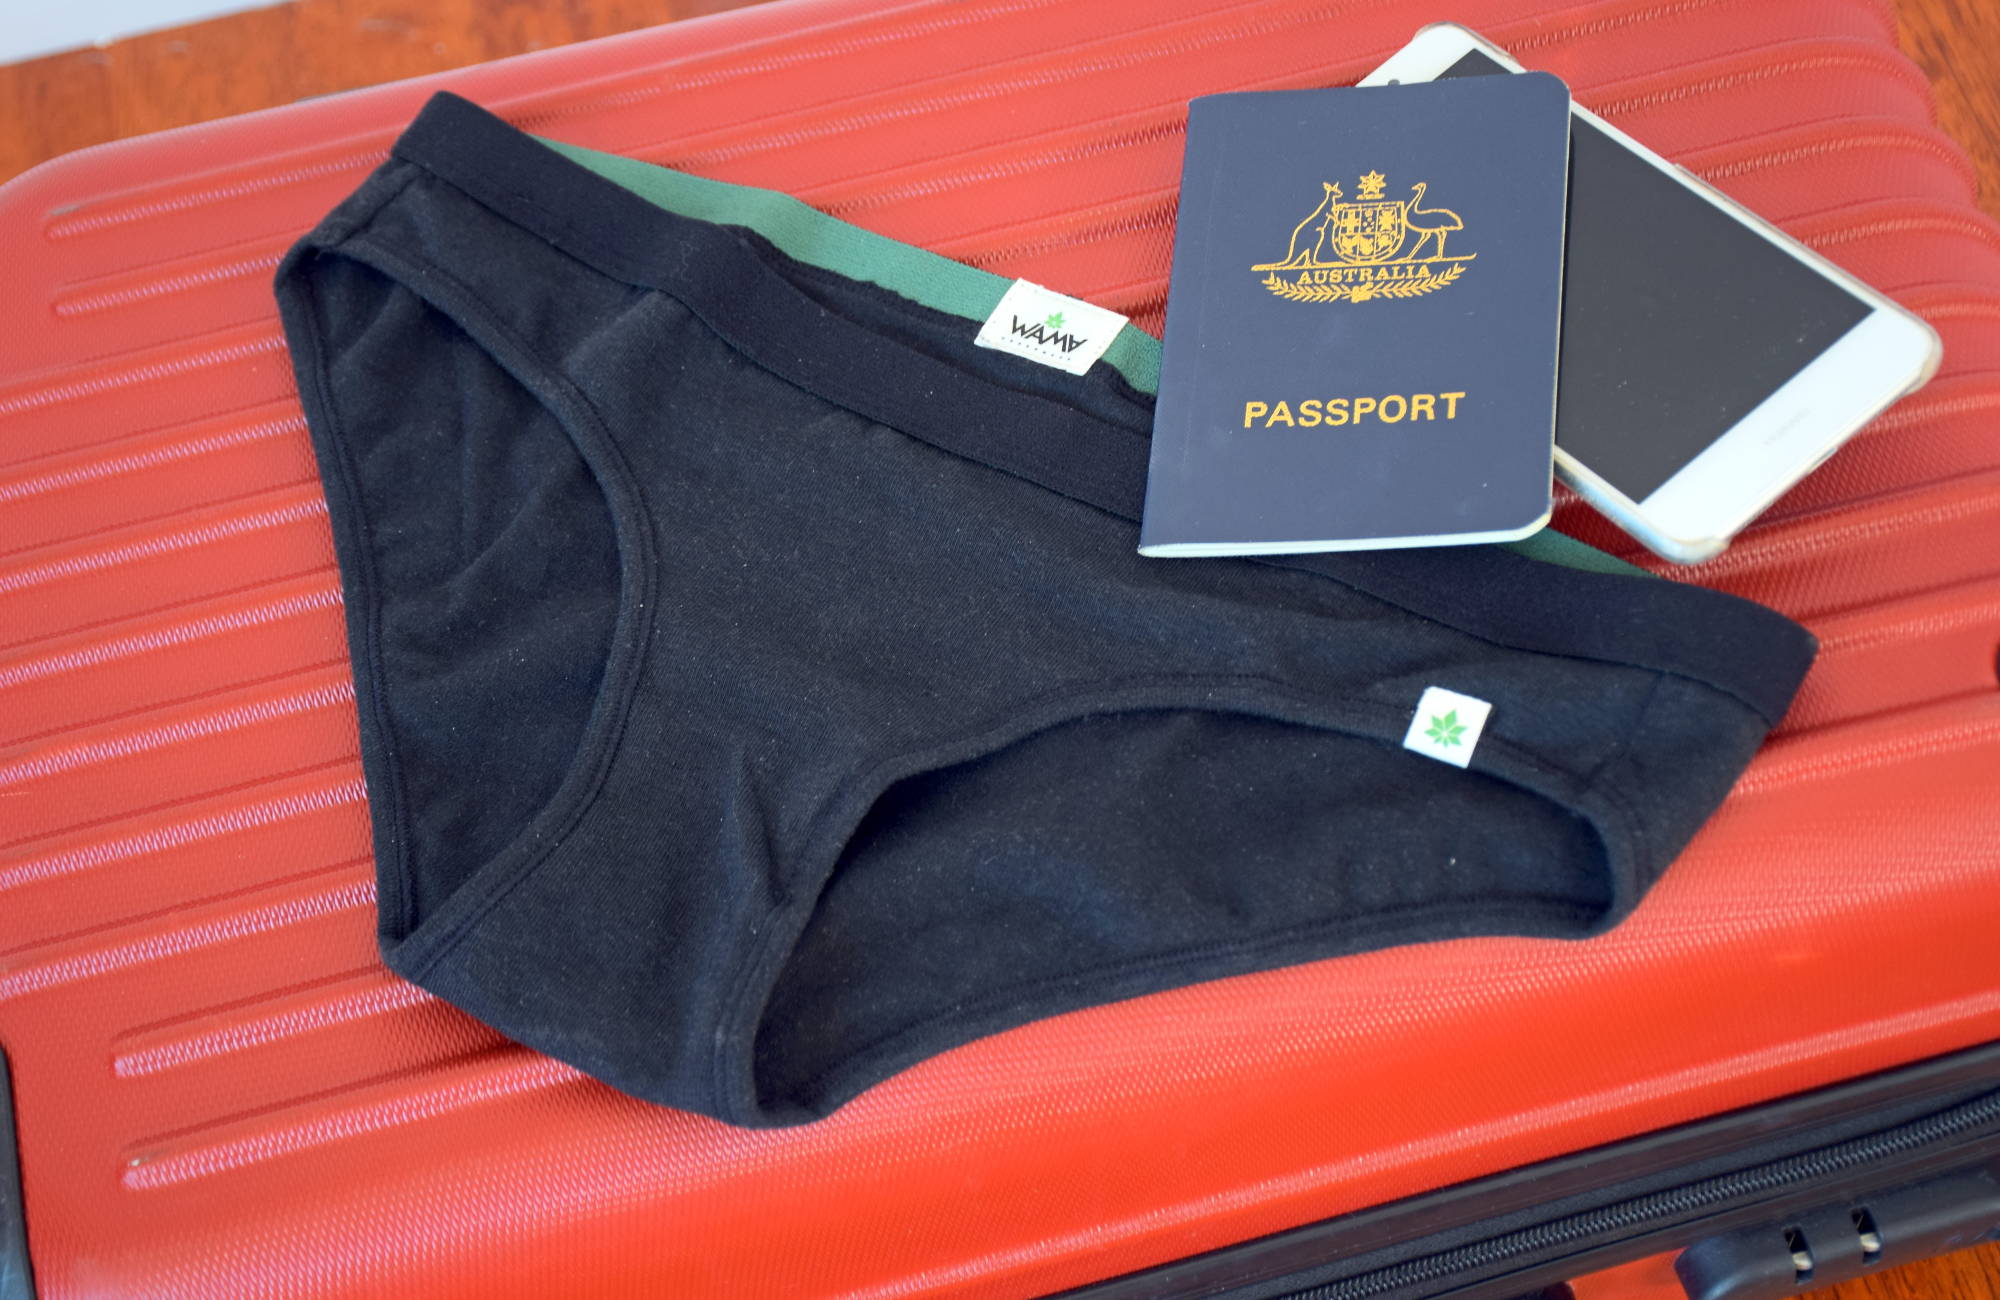  A pair of black underwear, an australian passport, and a white phone laid out on top of a red suitcase